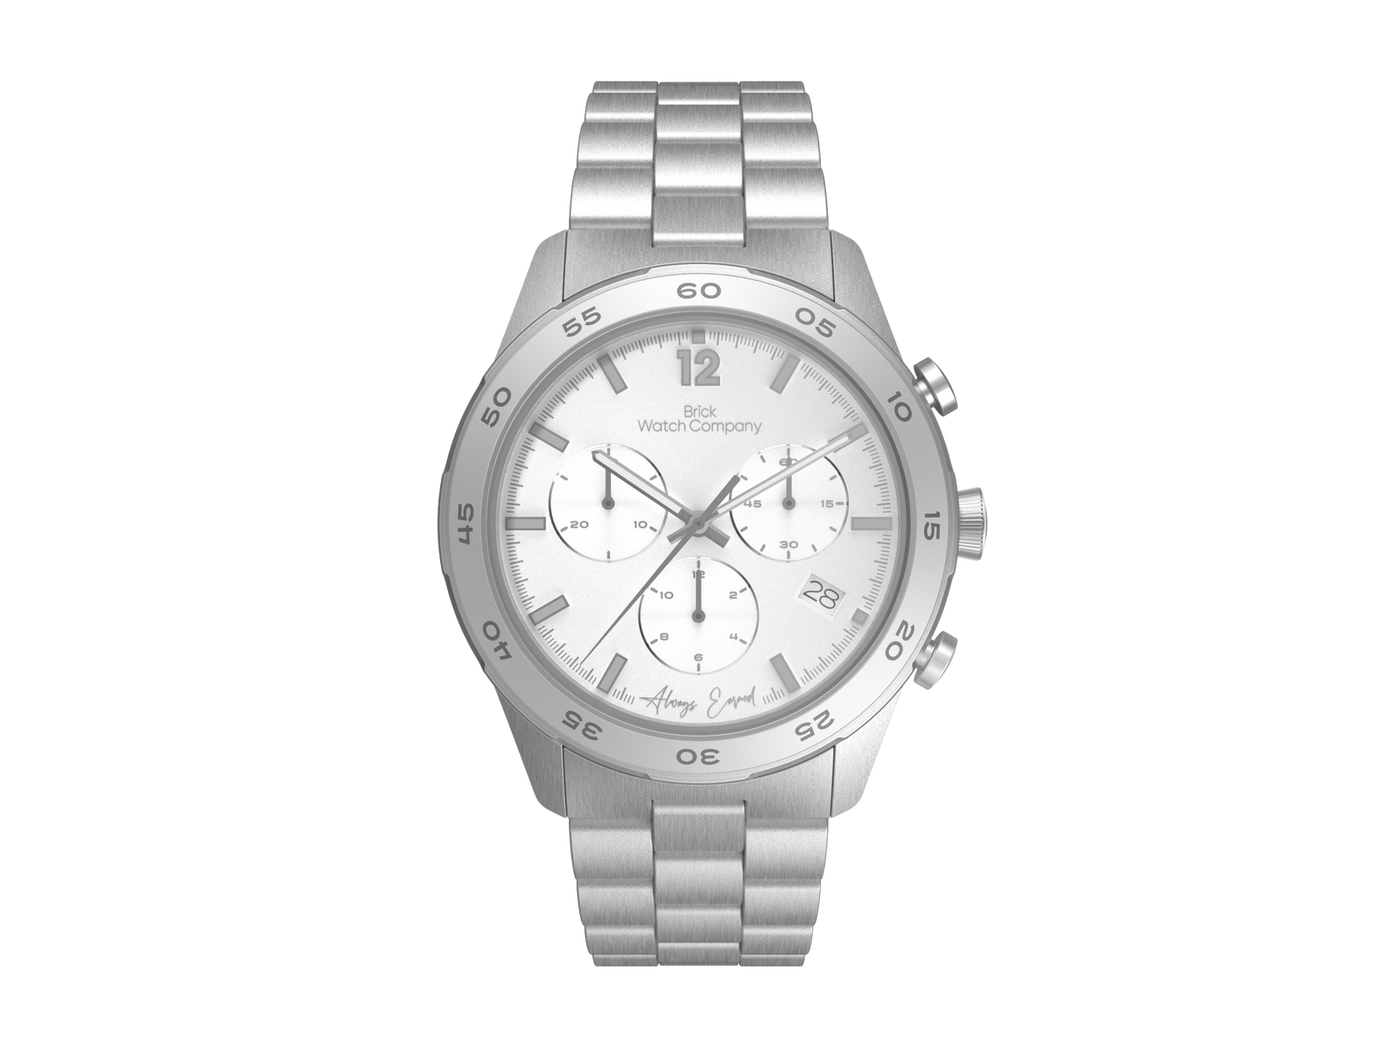 Chrono-Diver - Silver Case, White Dial, Gray Lumi Numbers